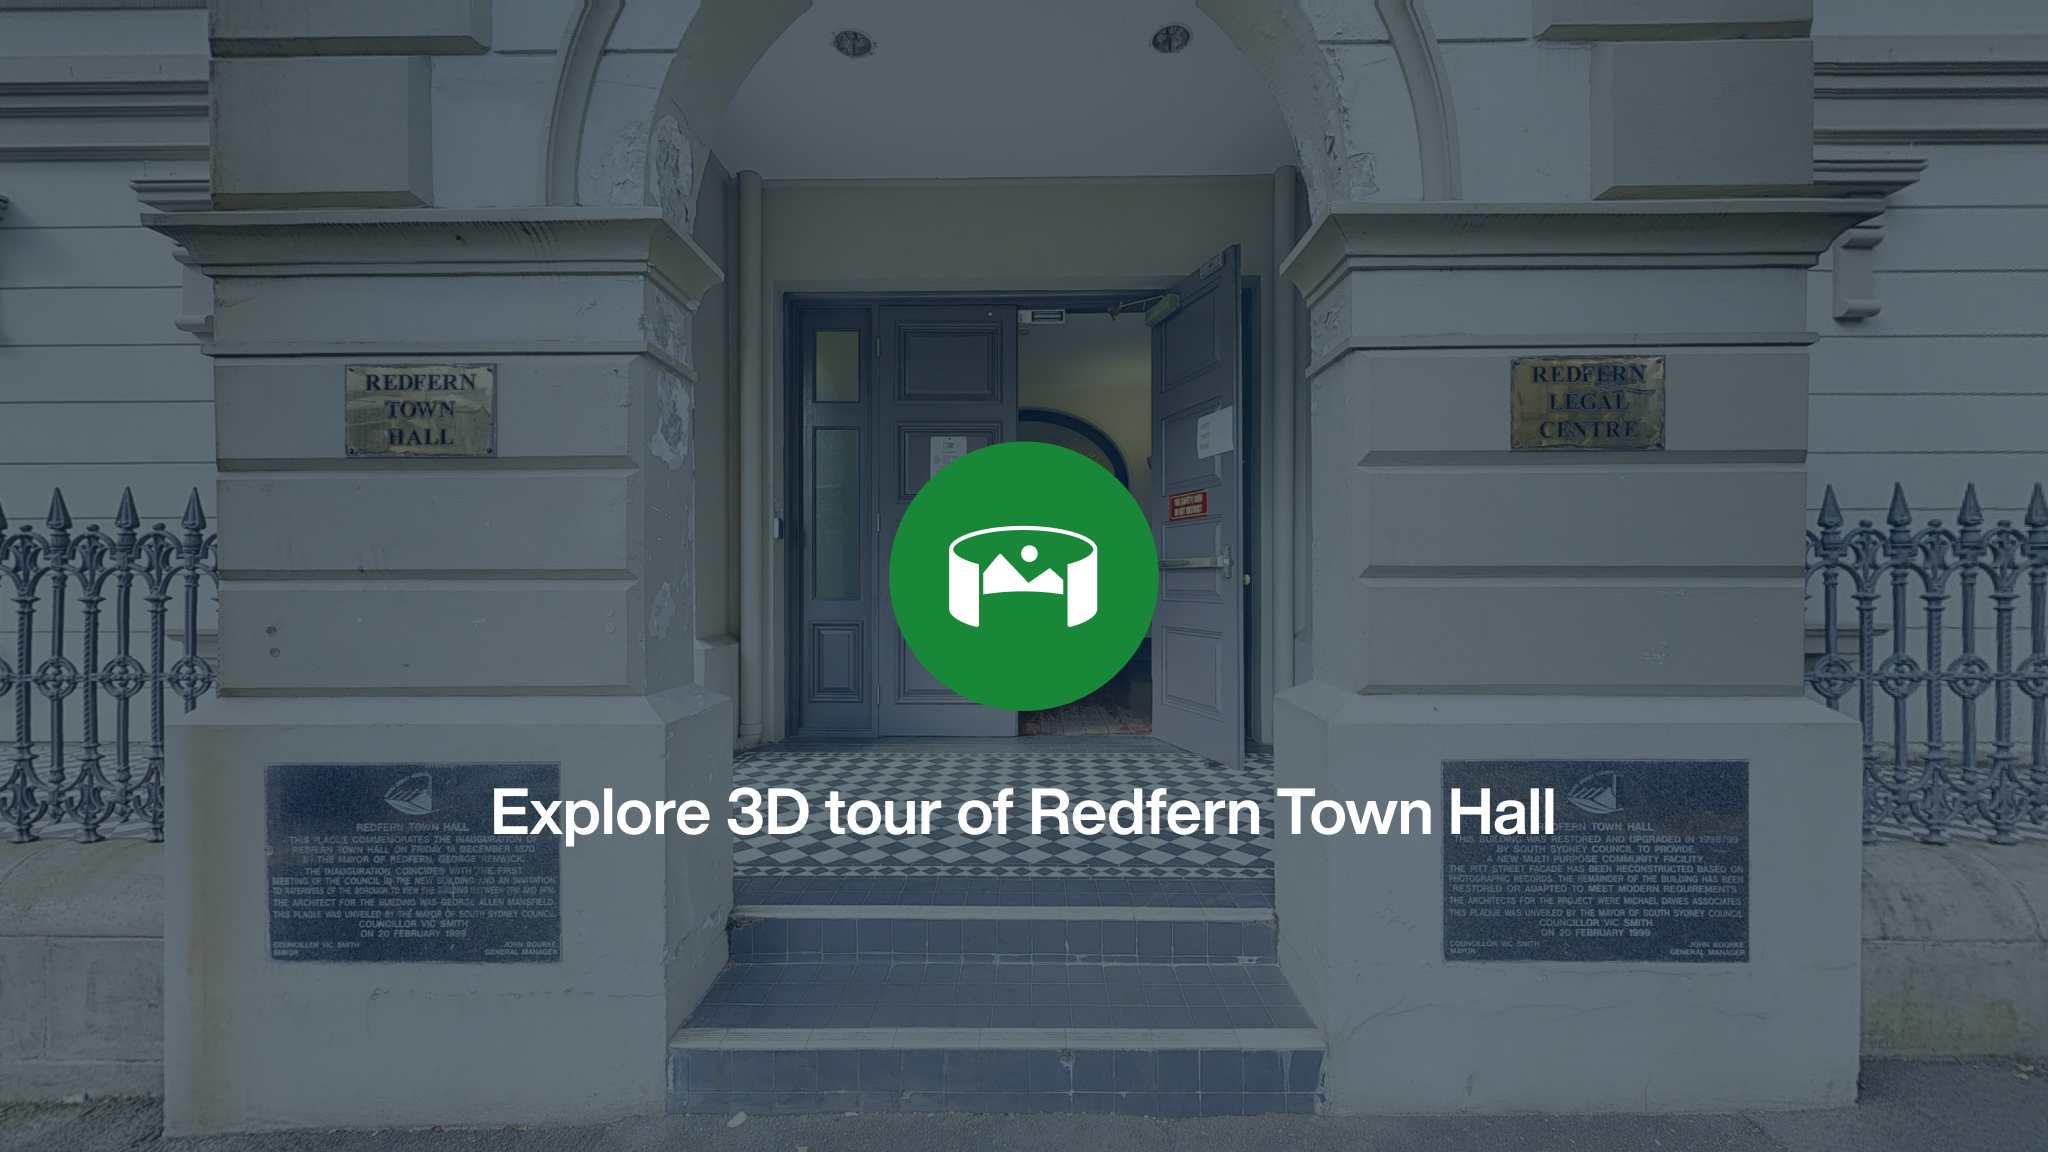 The front entrance to Redfern Town Hall overlayed with a green icon and the words Explore 3D tour of Redfern Town Hall.